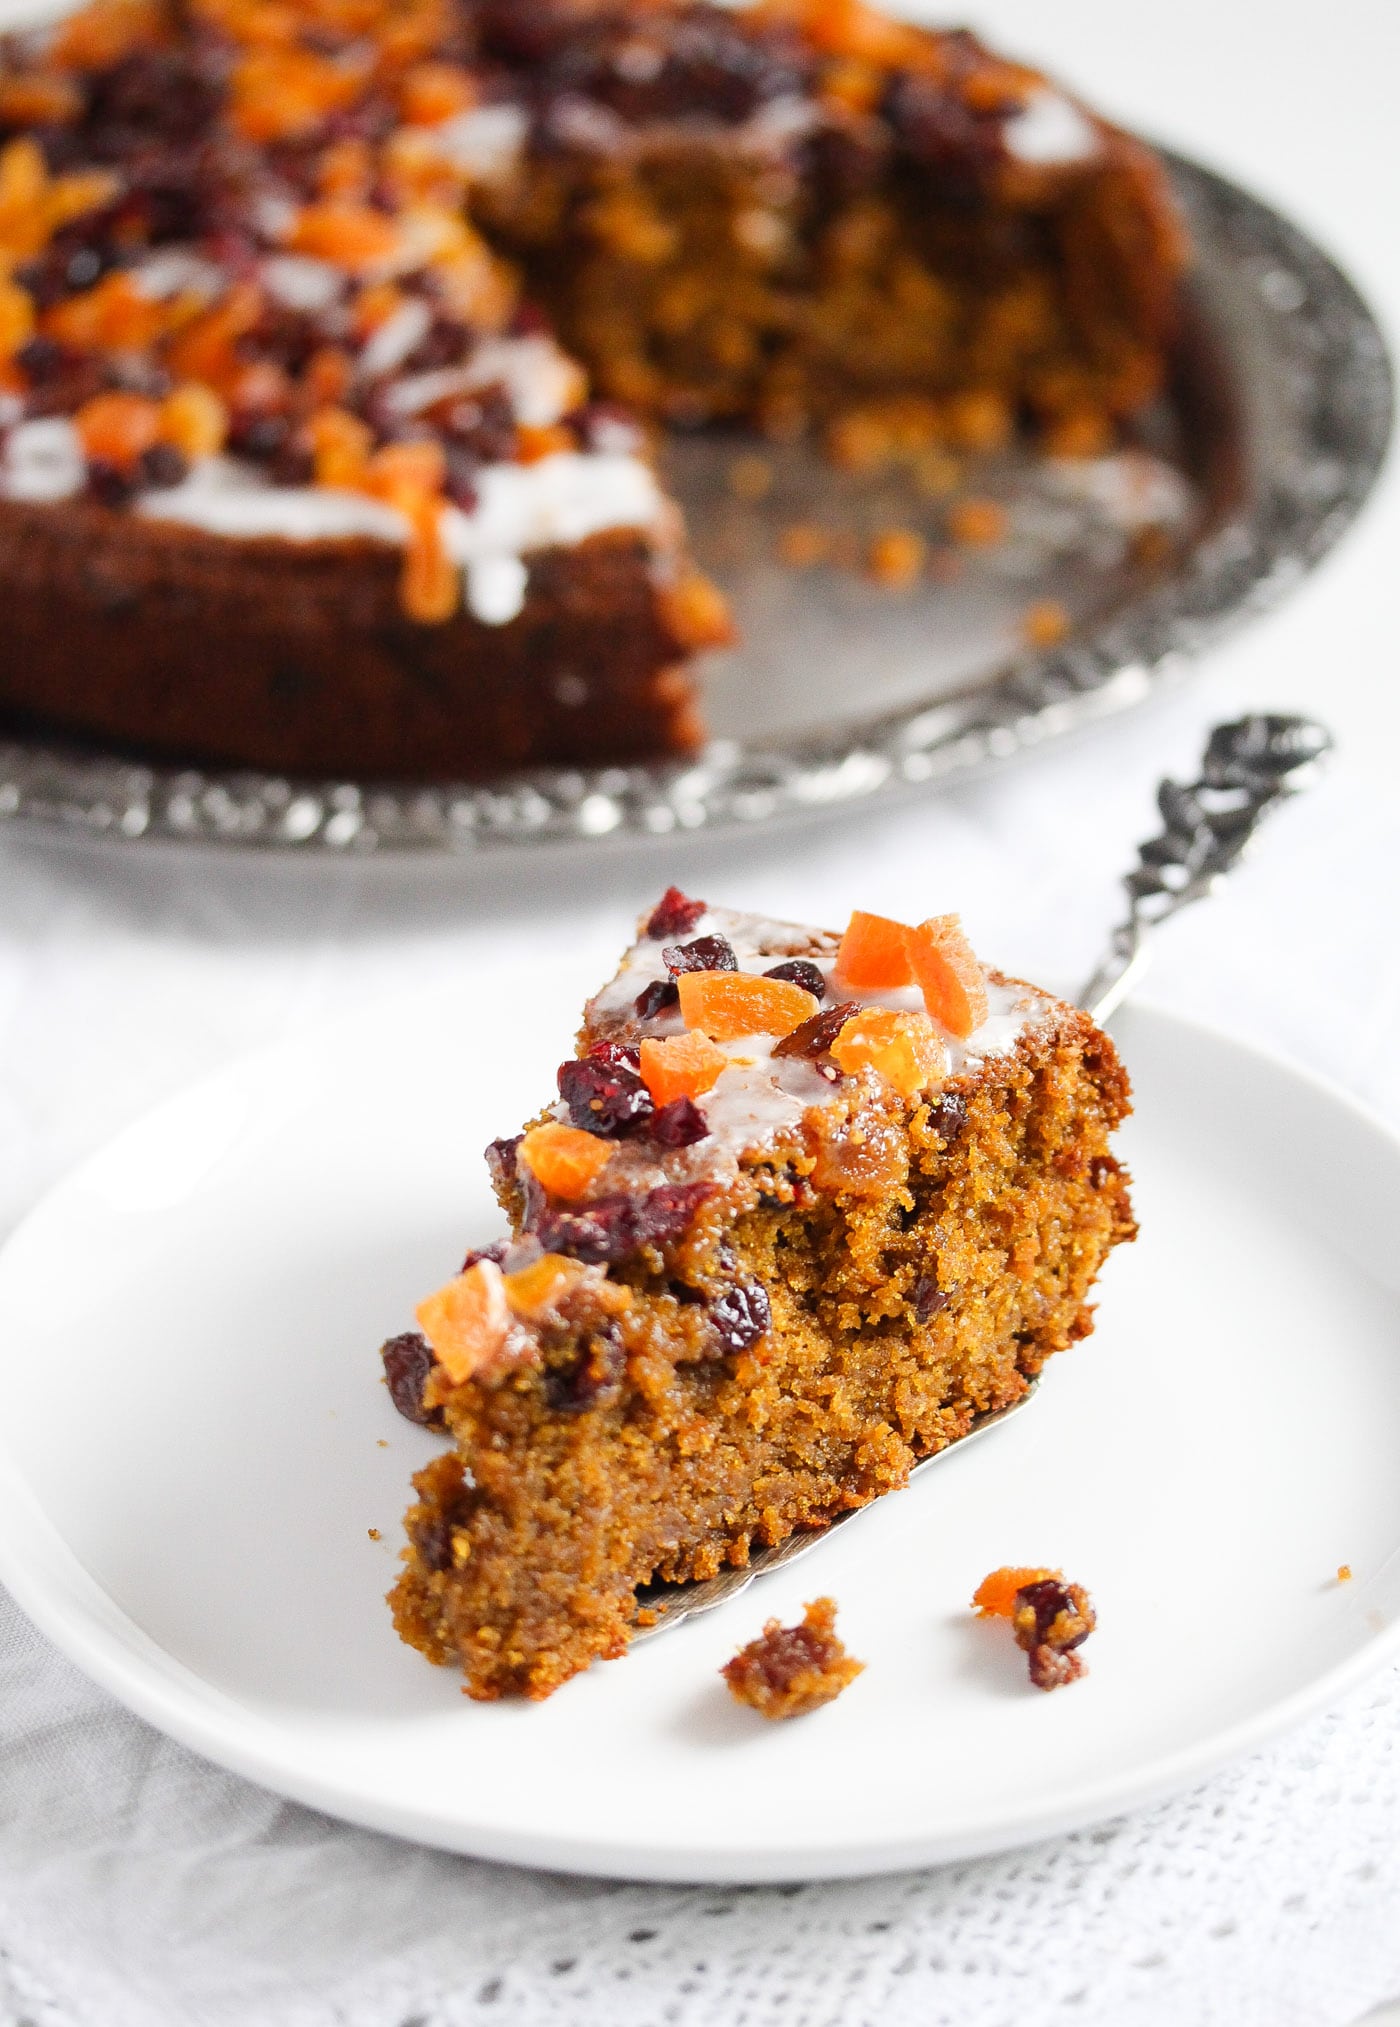 sliced piece of fruitcake with chopped apricots and raisins on top